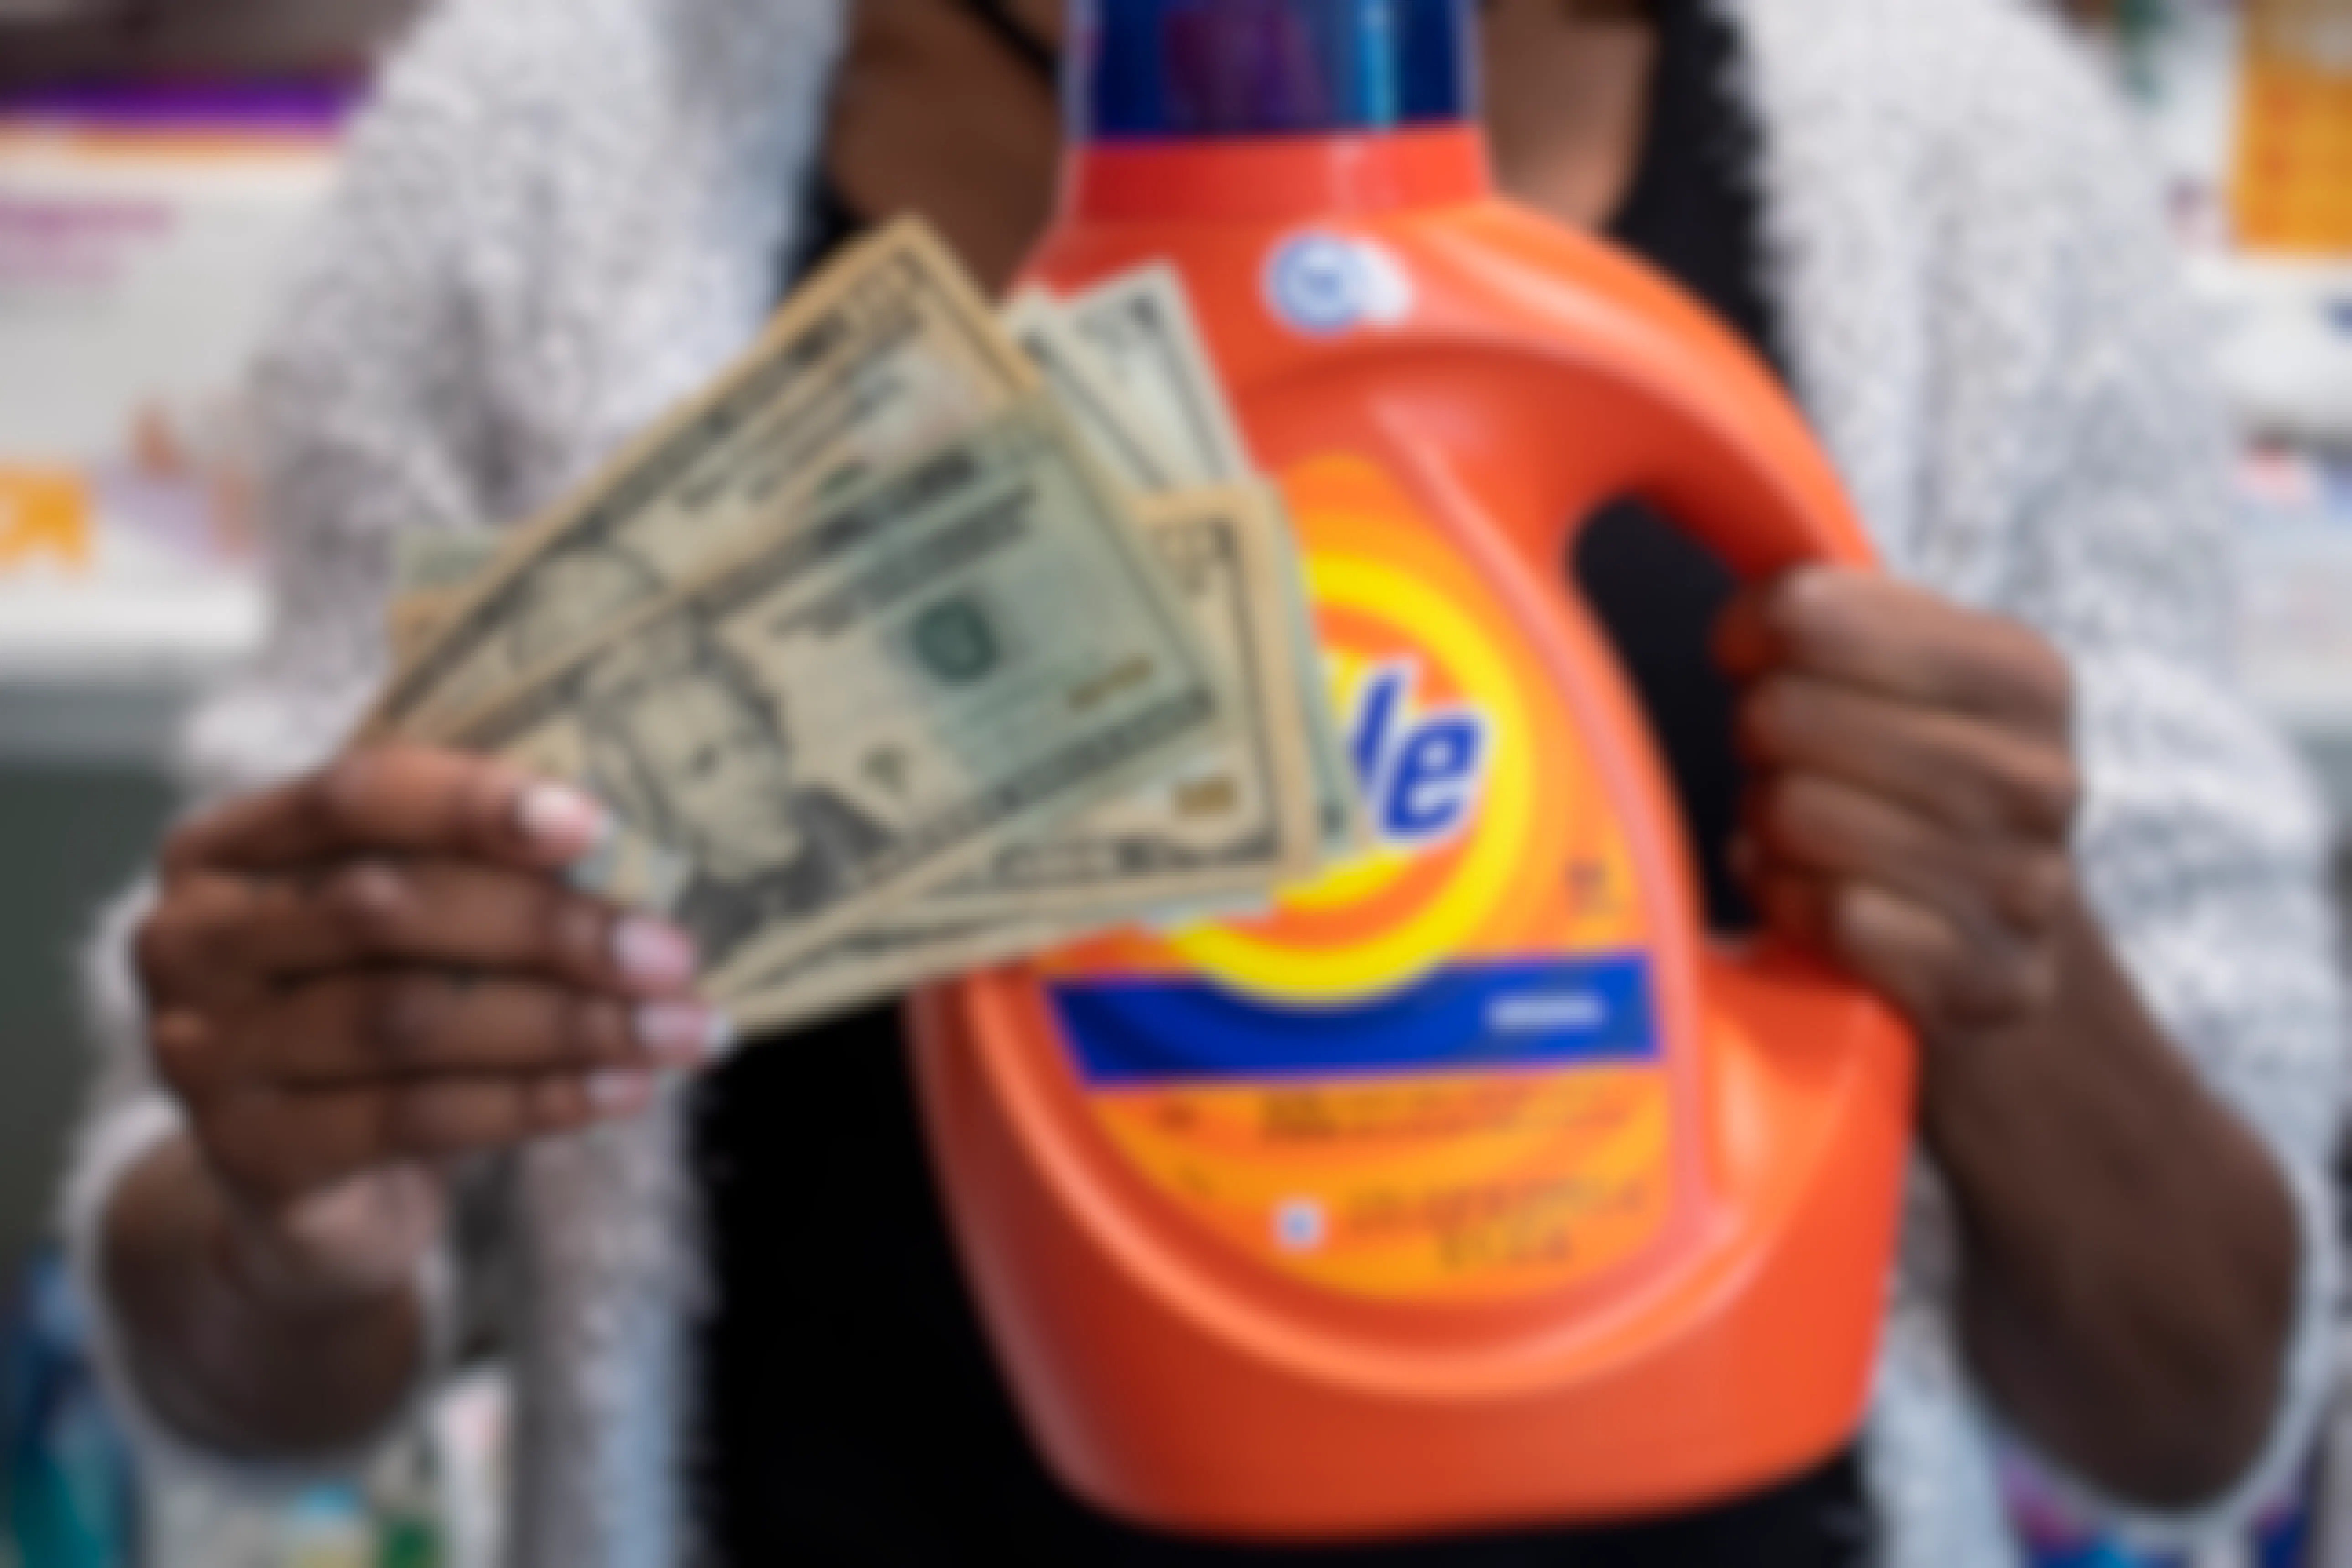 A person holding a stack of cash next to a bottle of Tide laundry detergent.